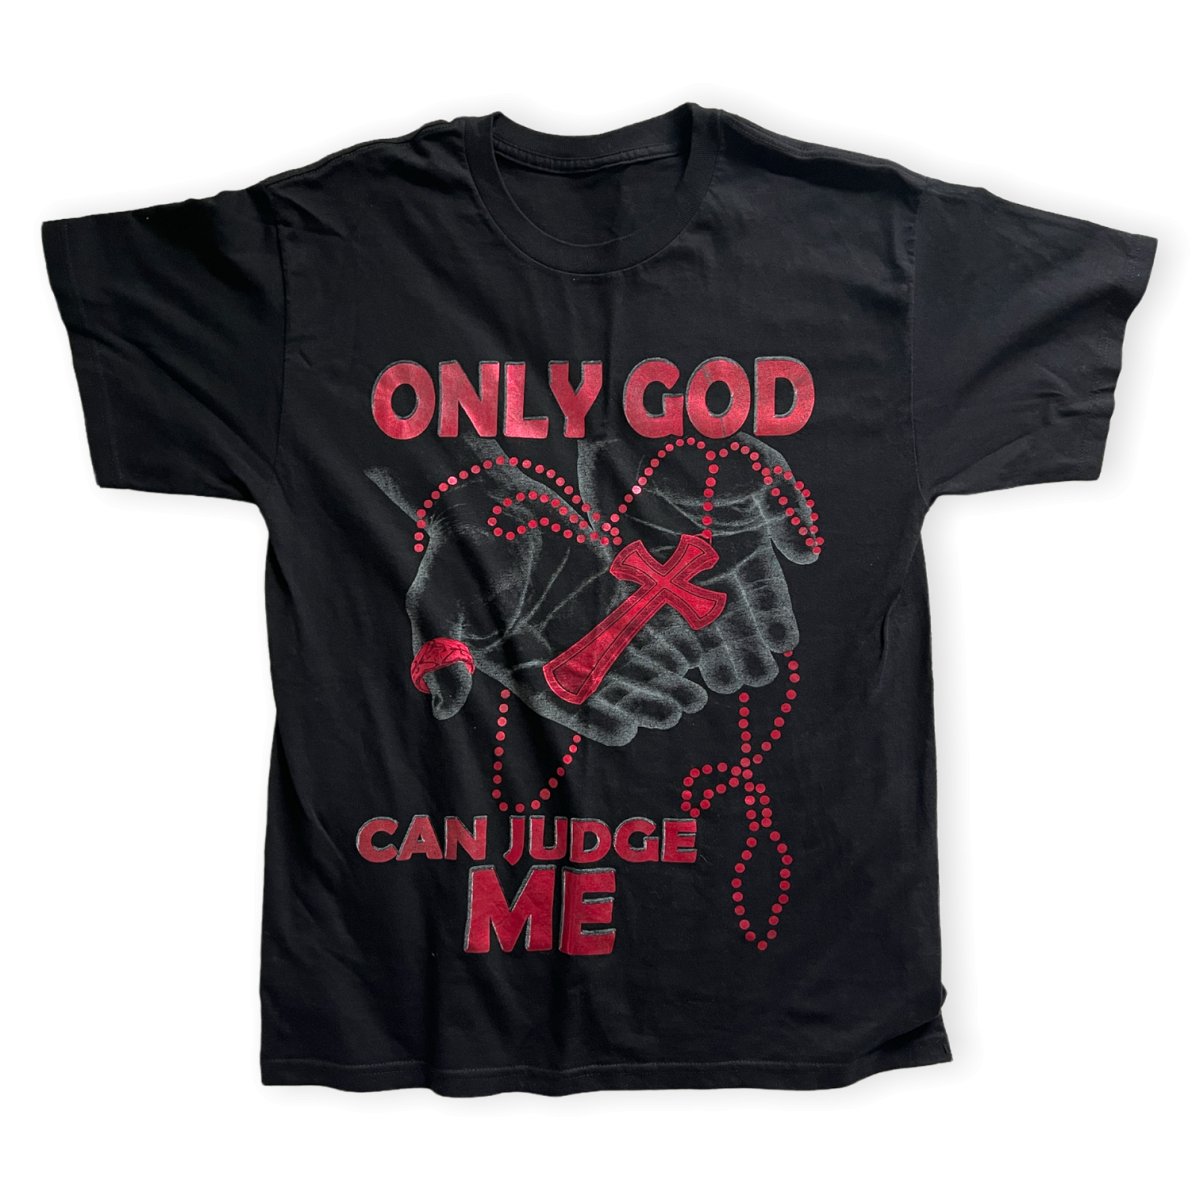 ONLY GOD CAN JUDGE ME - I NEED GOD